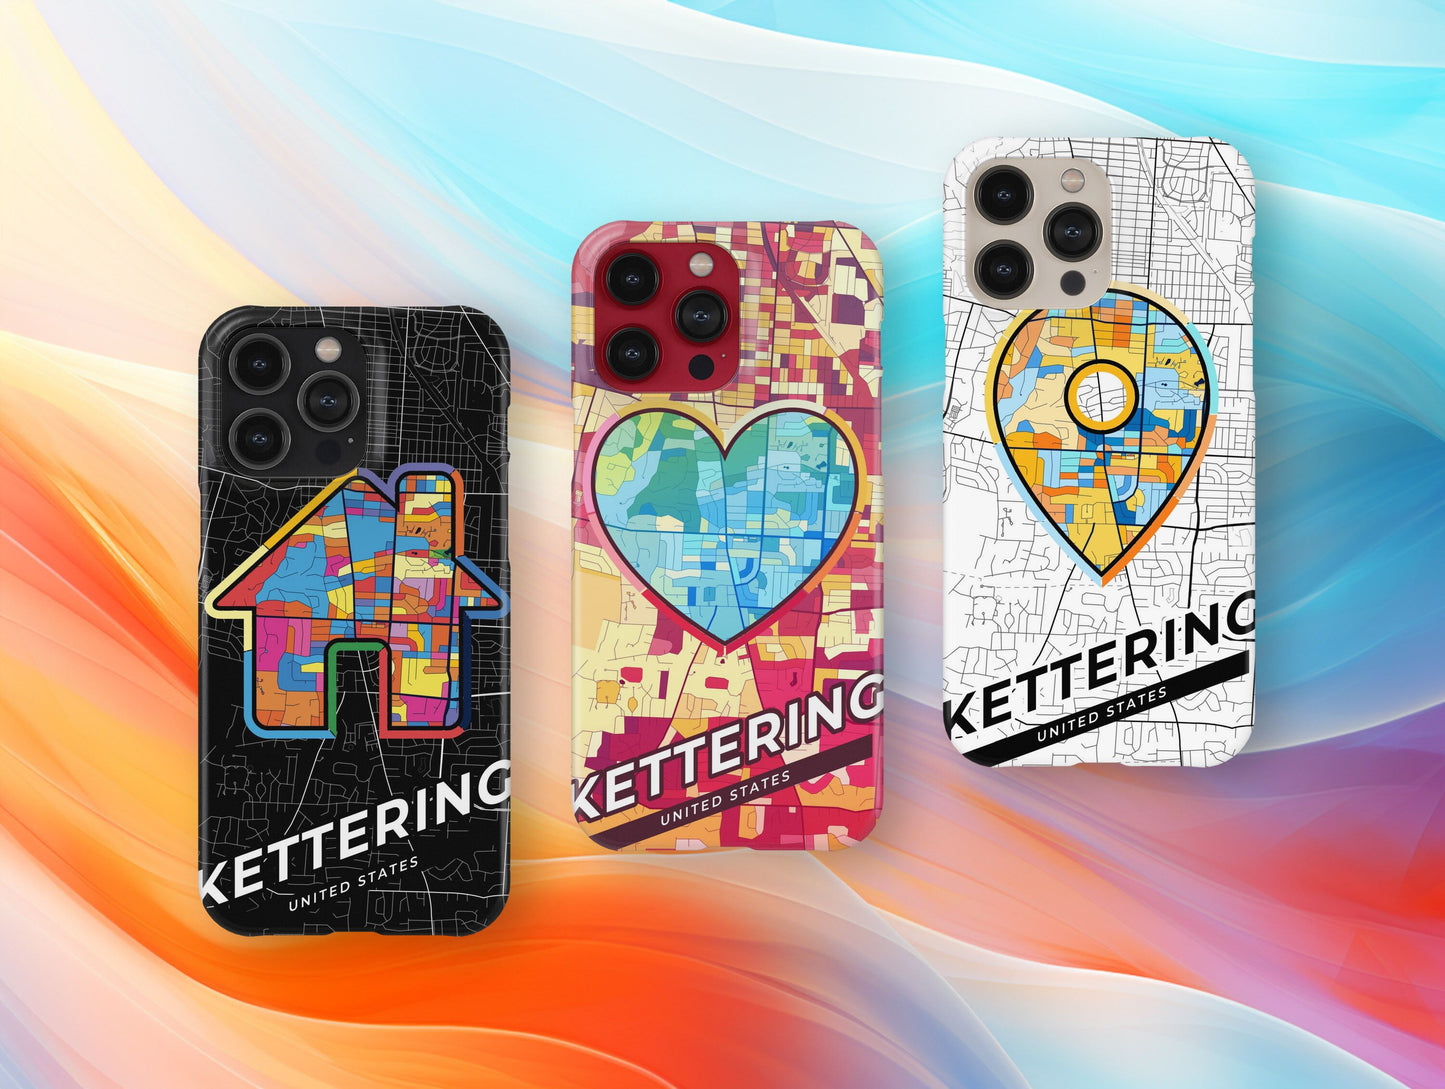 Kettering Ohio slim phone case with colorful icon. Birthday, wedding or housewarming gift. Couple match cases.